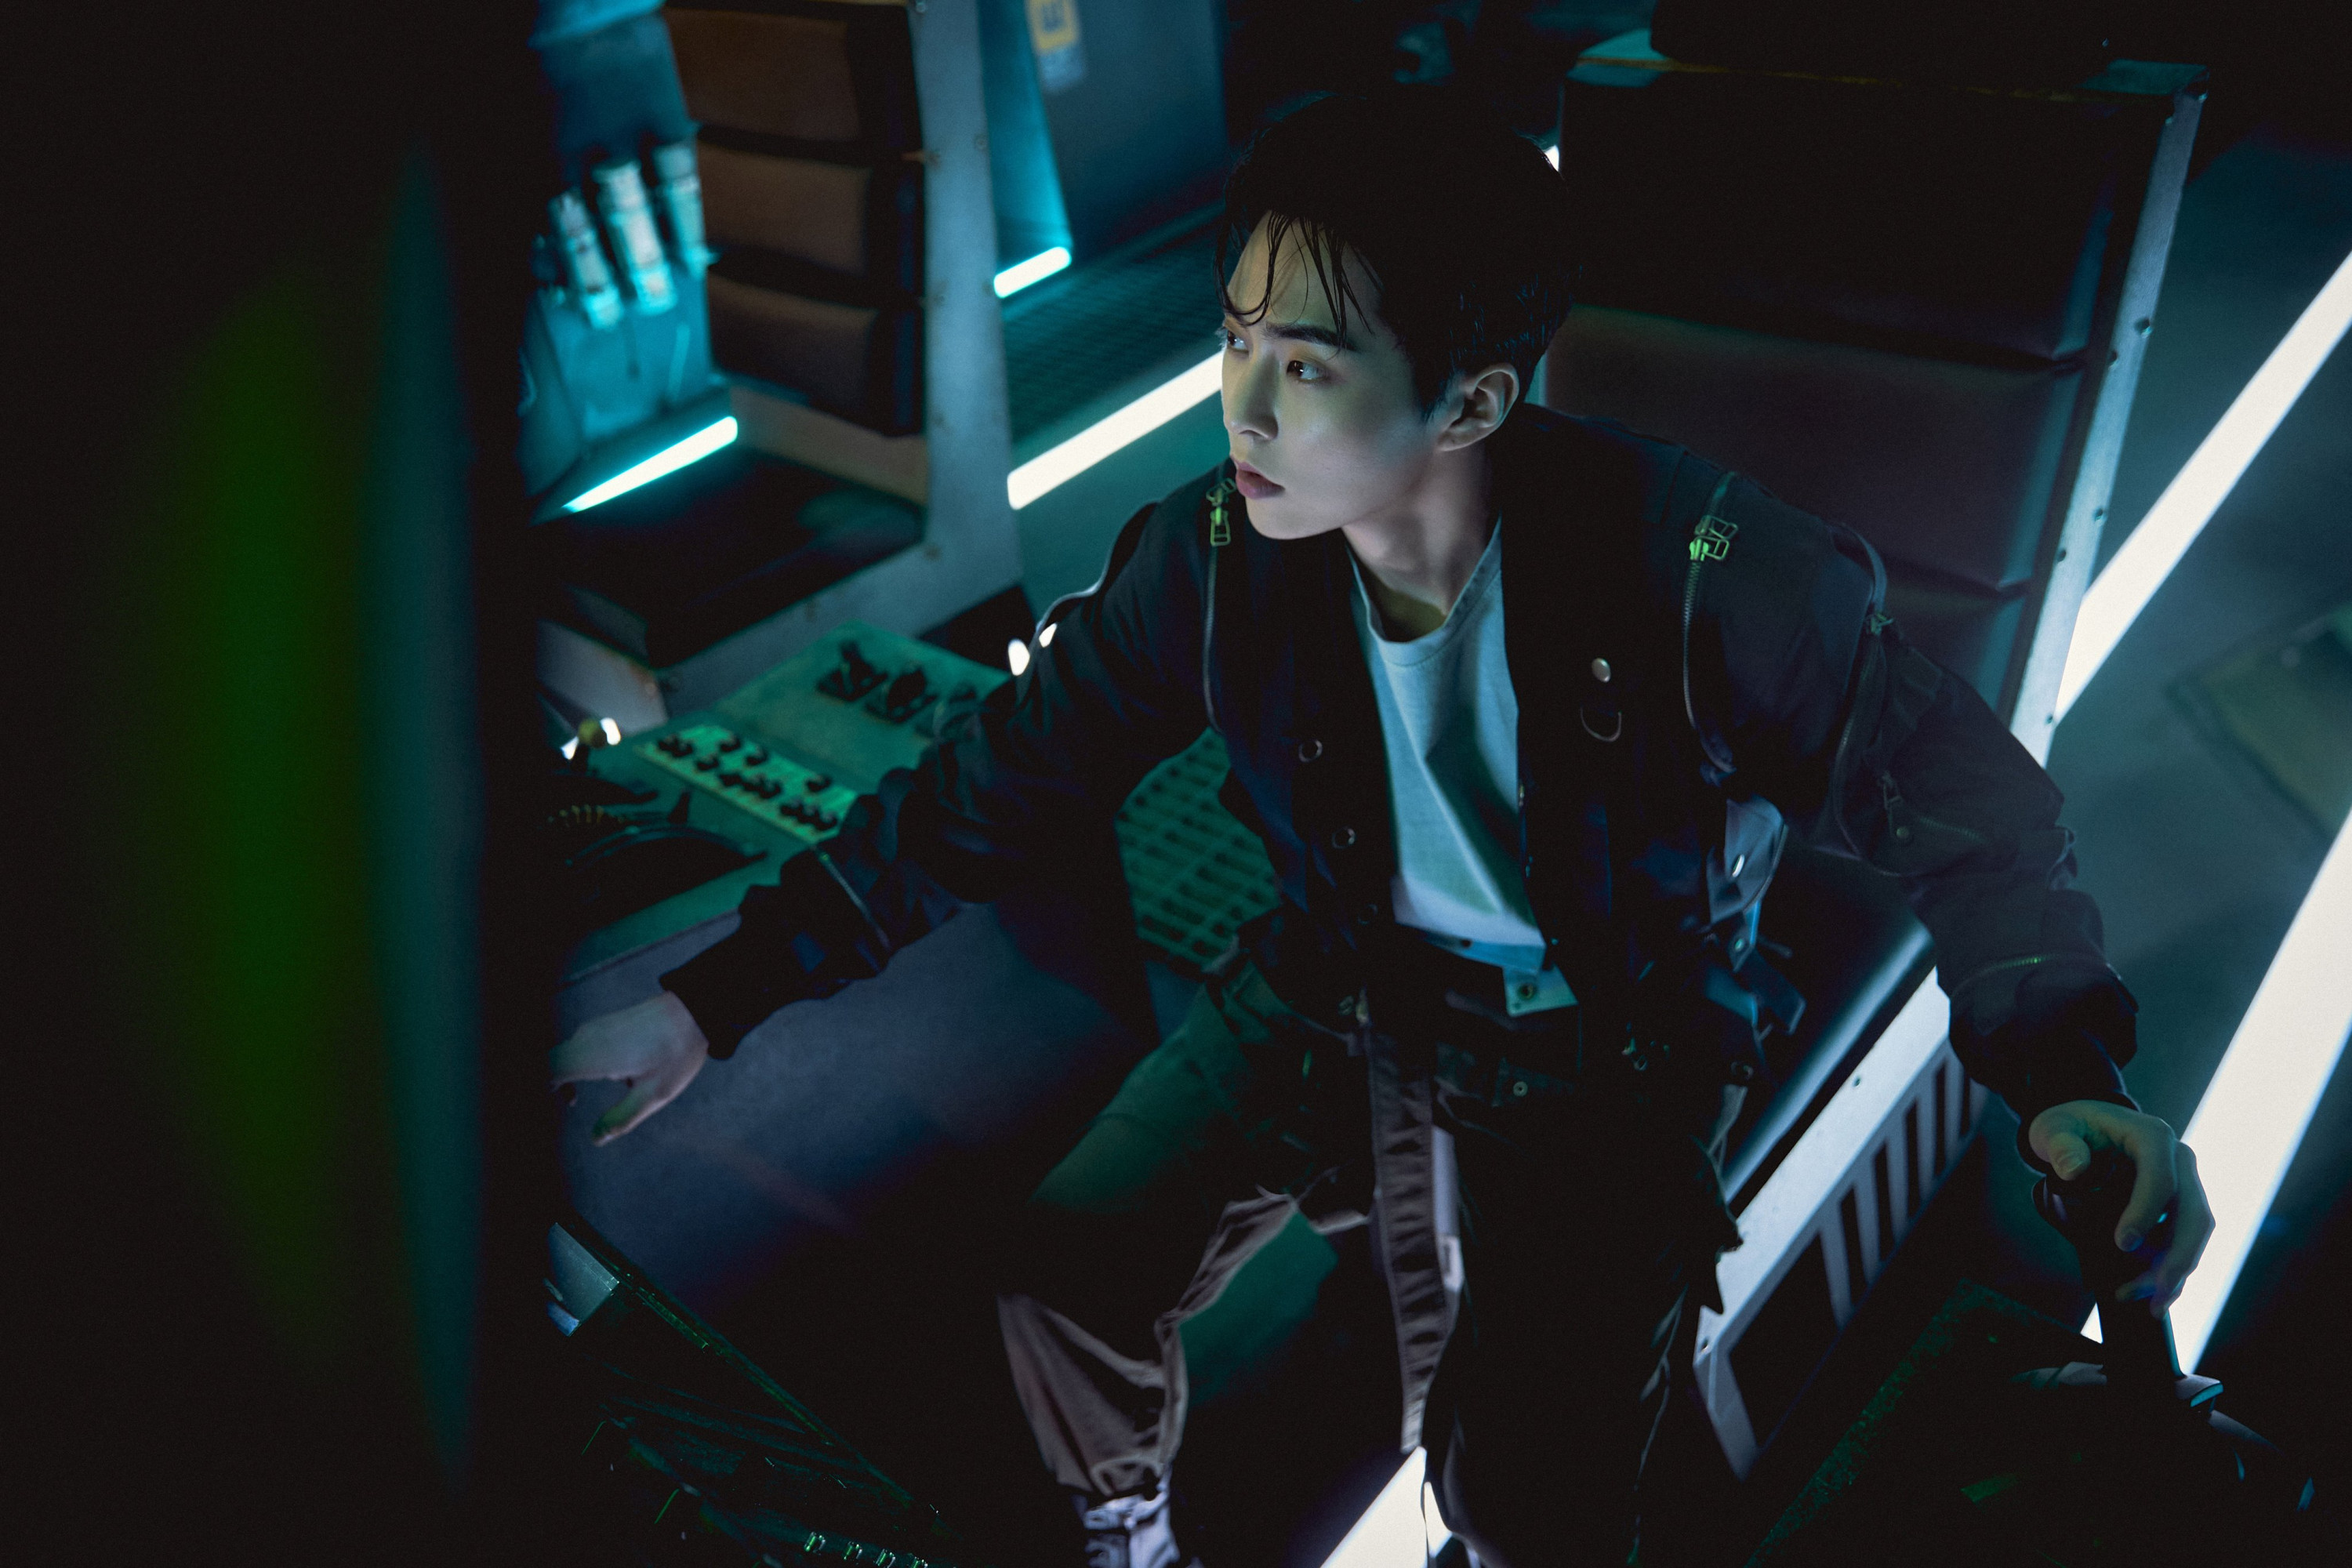 EXO Xiumin EP 02. ONE GIANT LEAP Teasers [Don't Fight The Feeling]